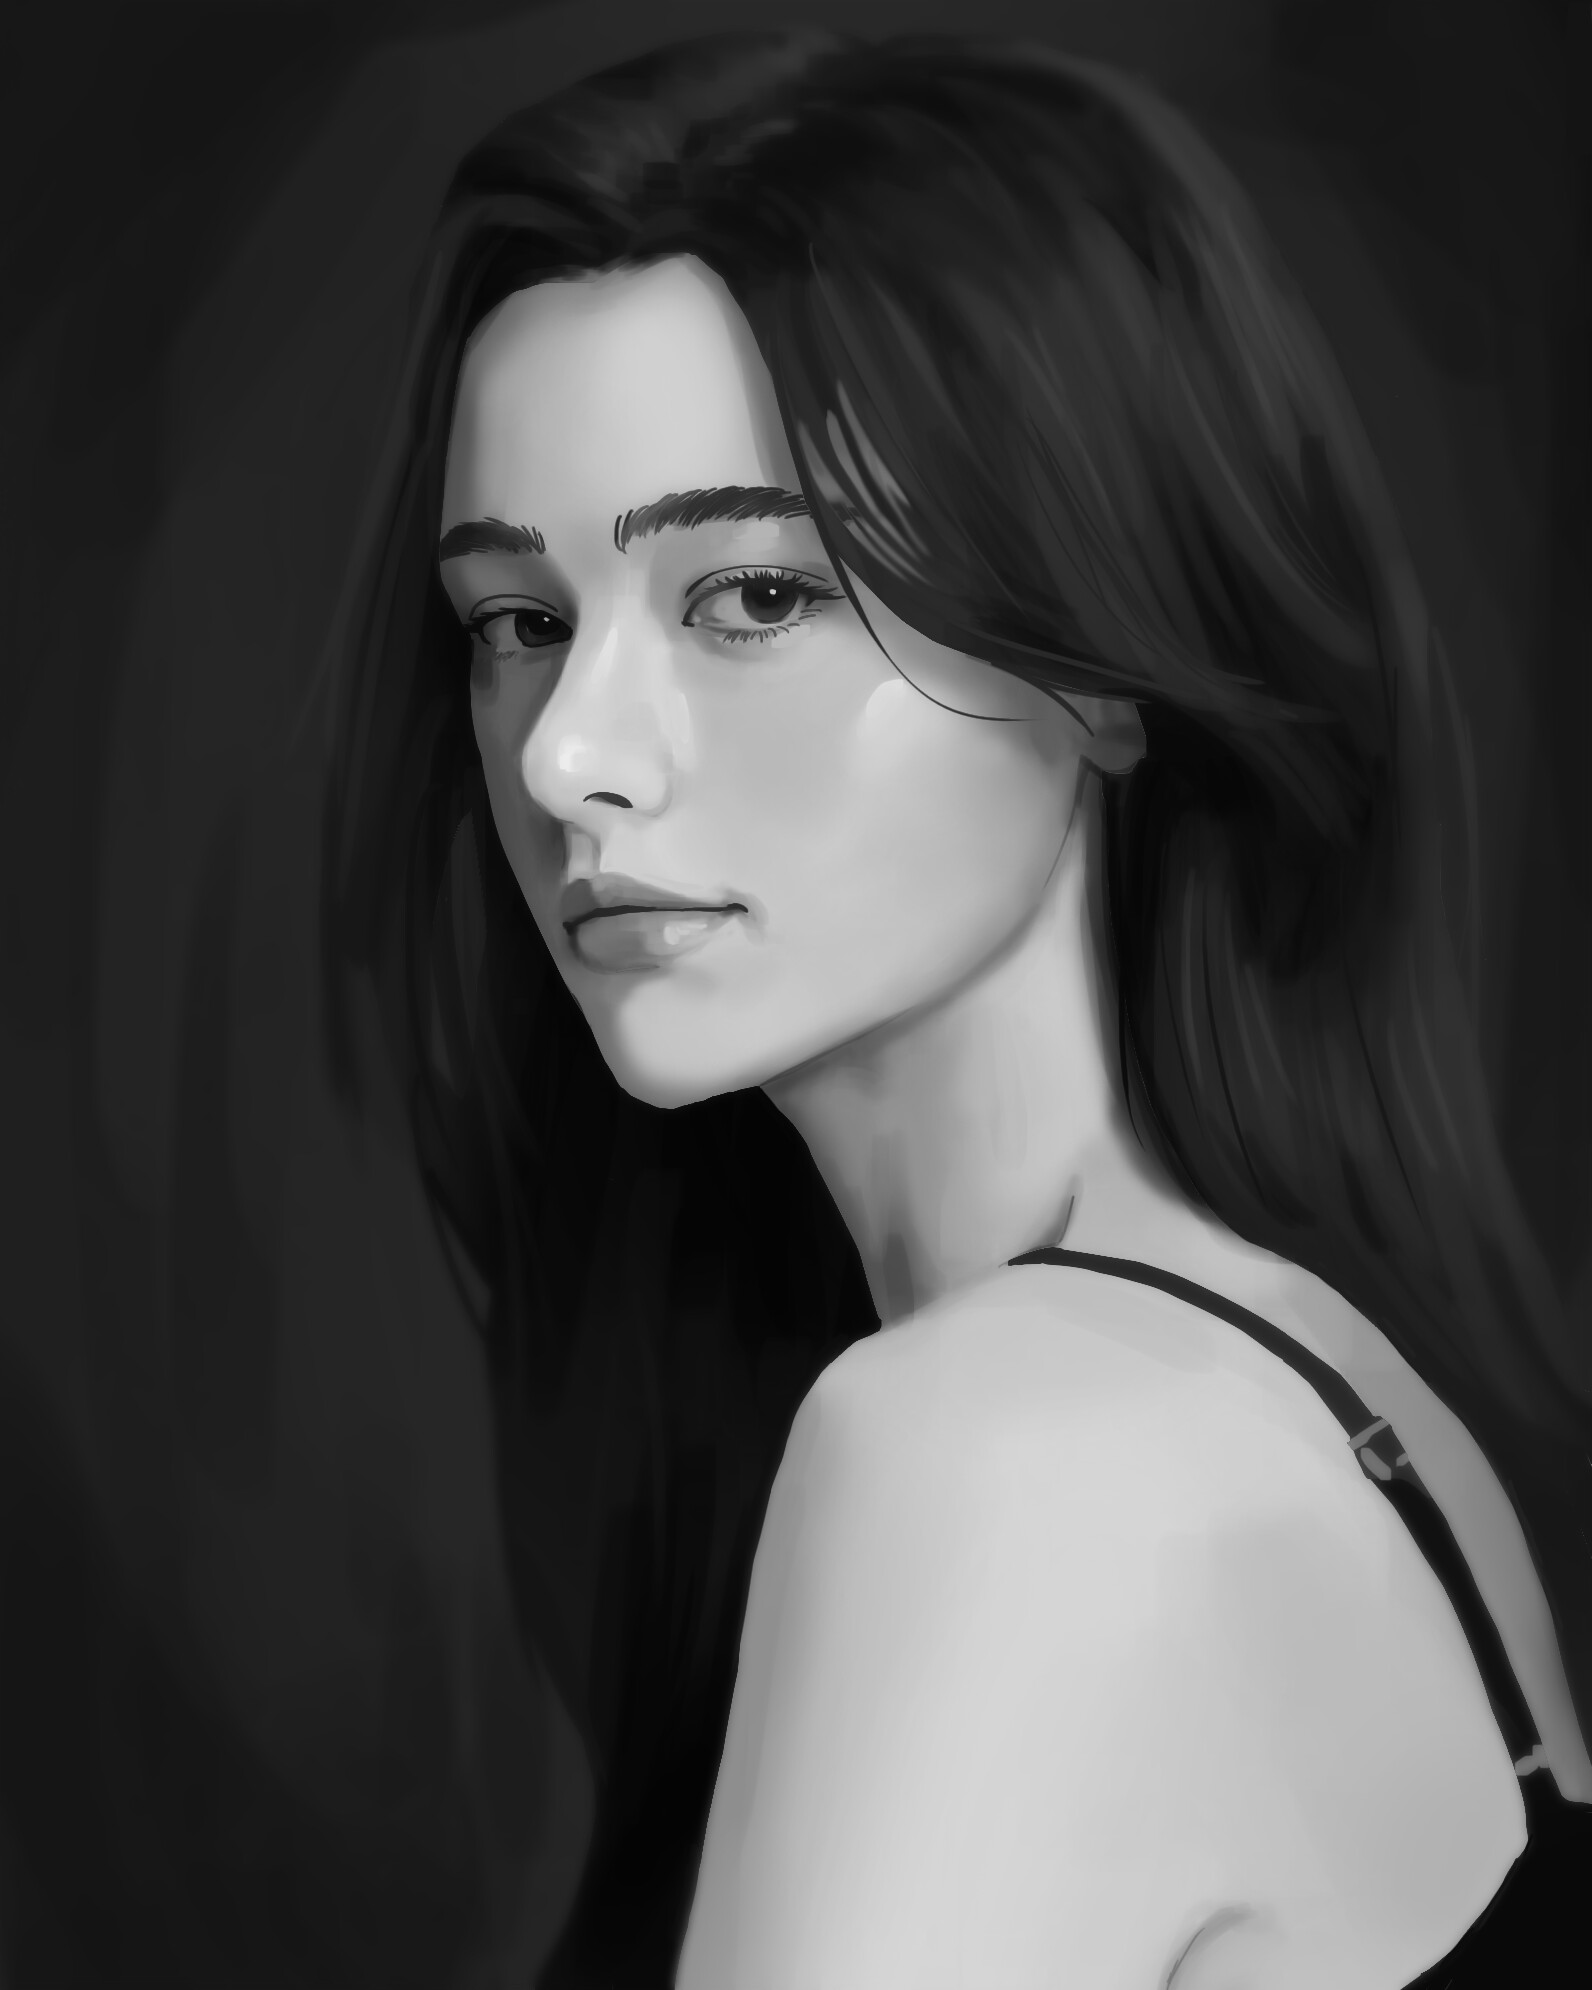 ArtStation - Collection of Portraits 01-05